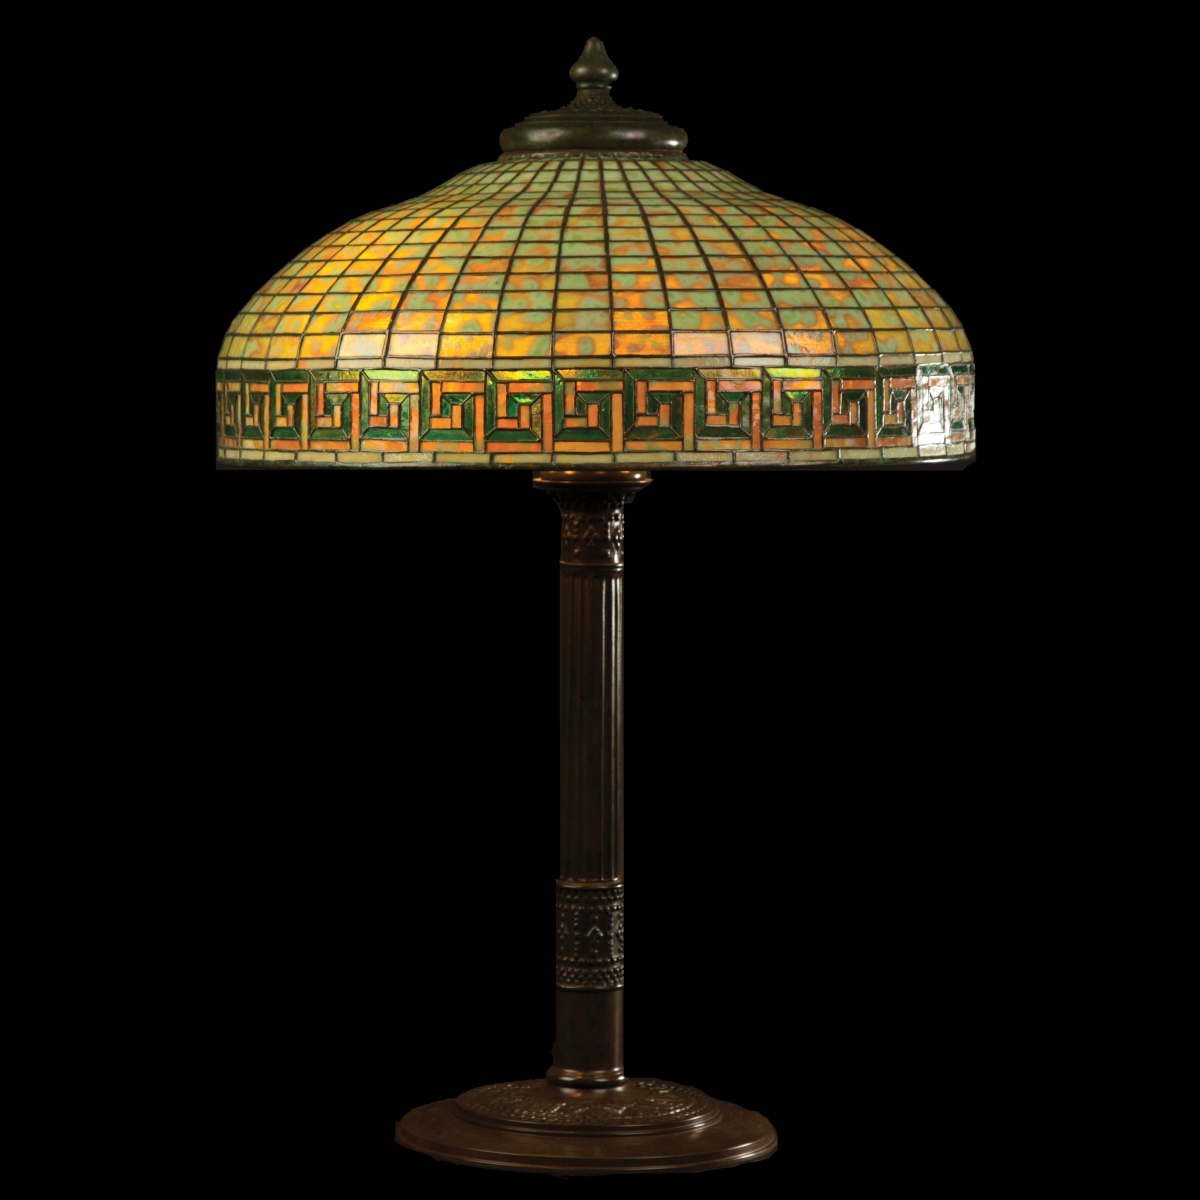 The top-selling lot among Tiffany table lamps was this Greek Key lamp ($25/35,000) that did well at $89,700.